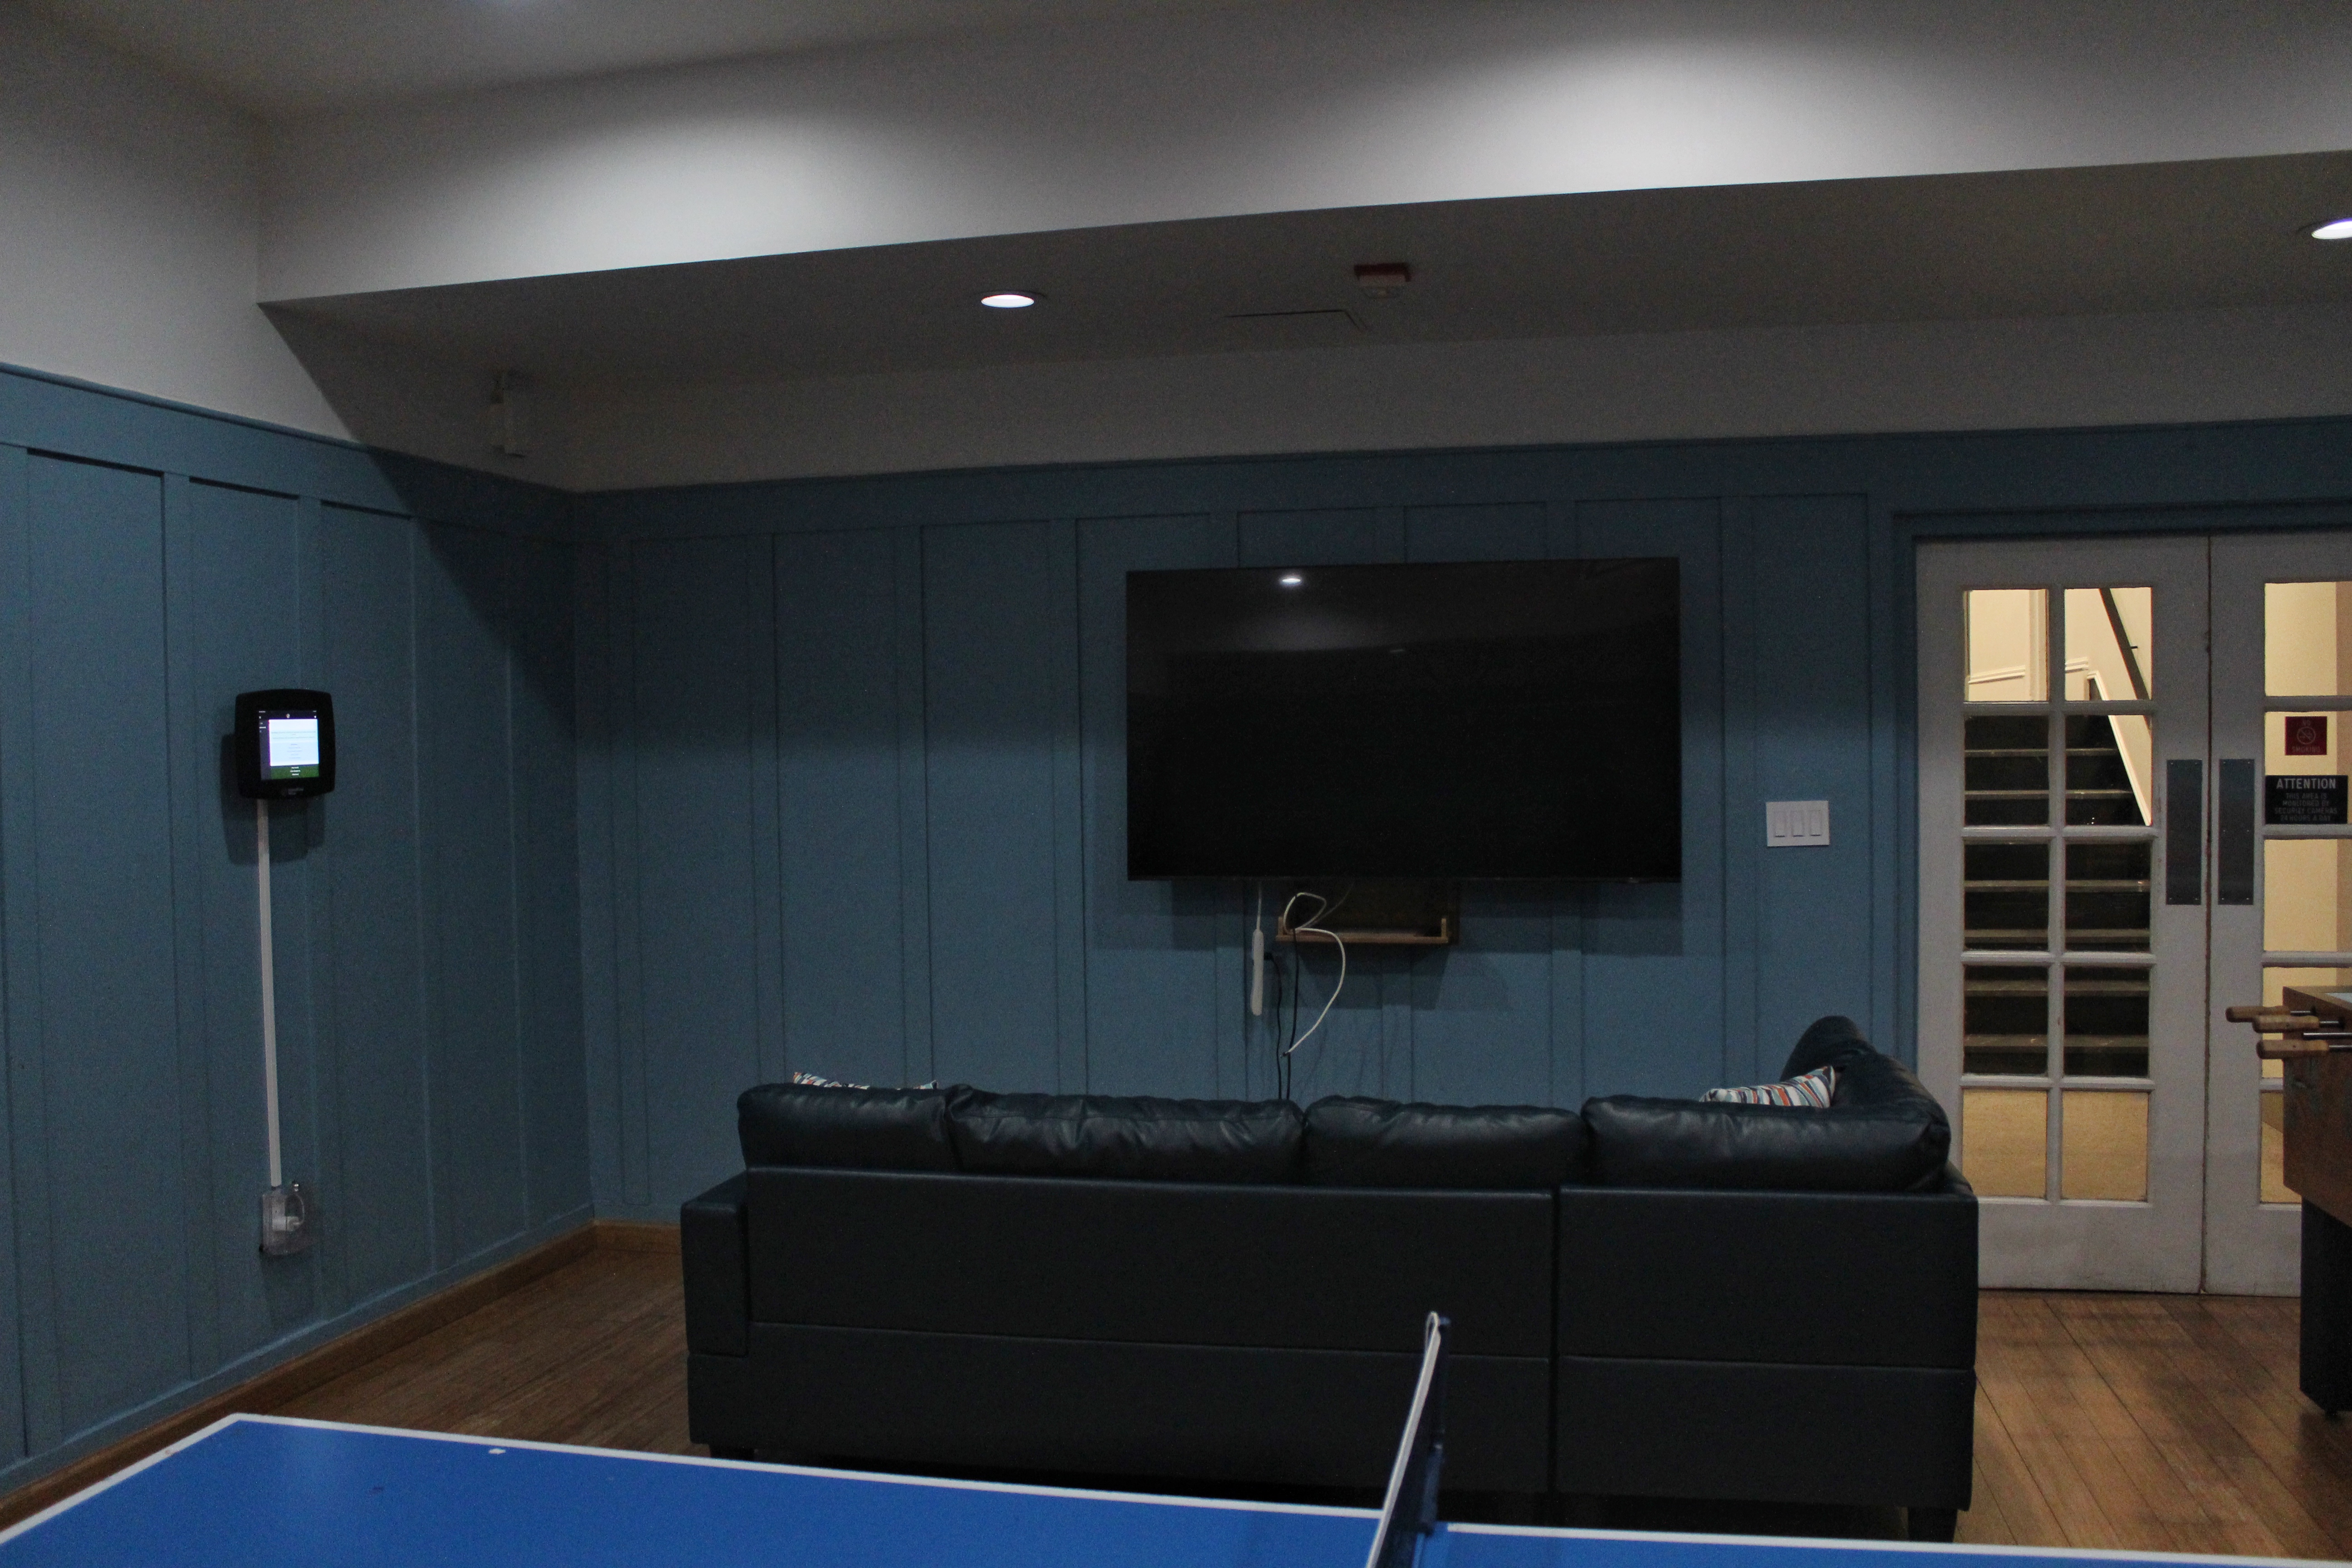 A television with a sofa in front of it on a blue wood-panelled wall.